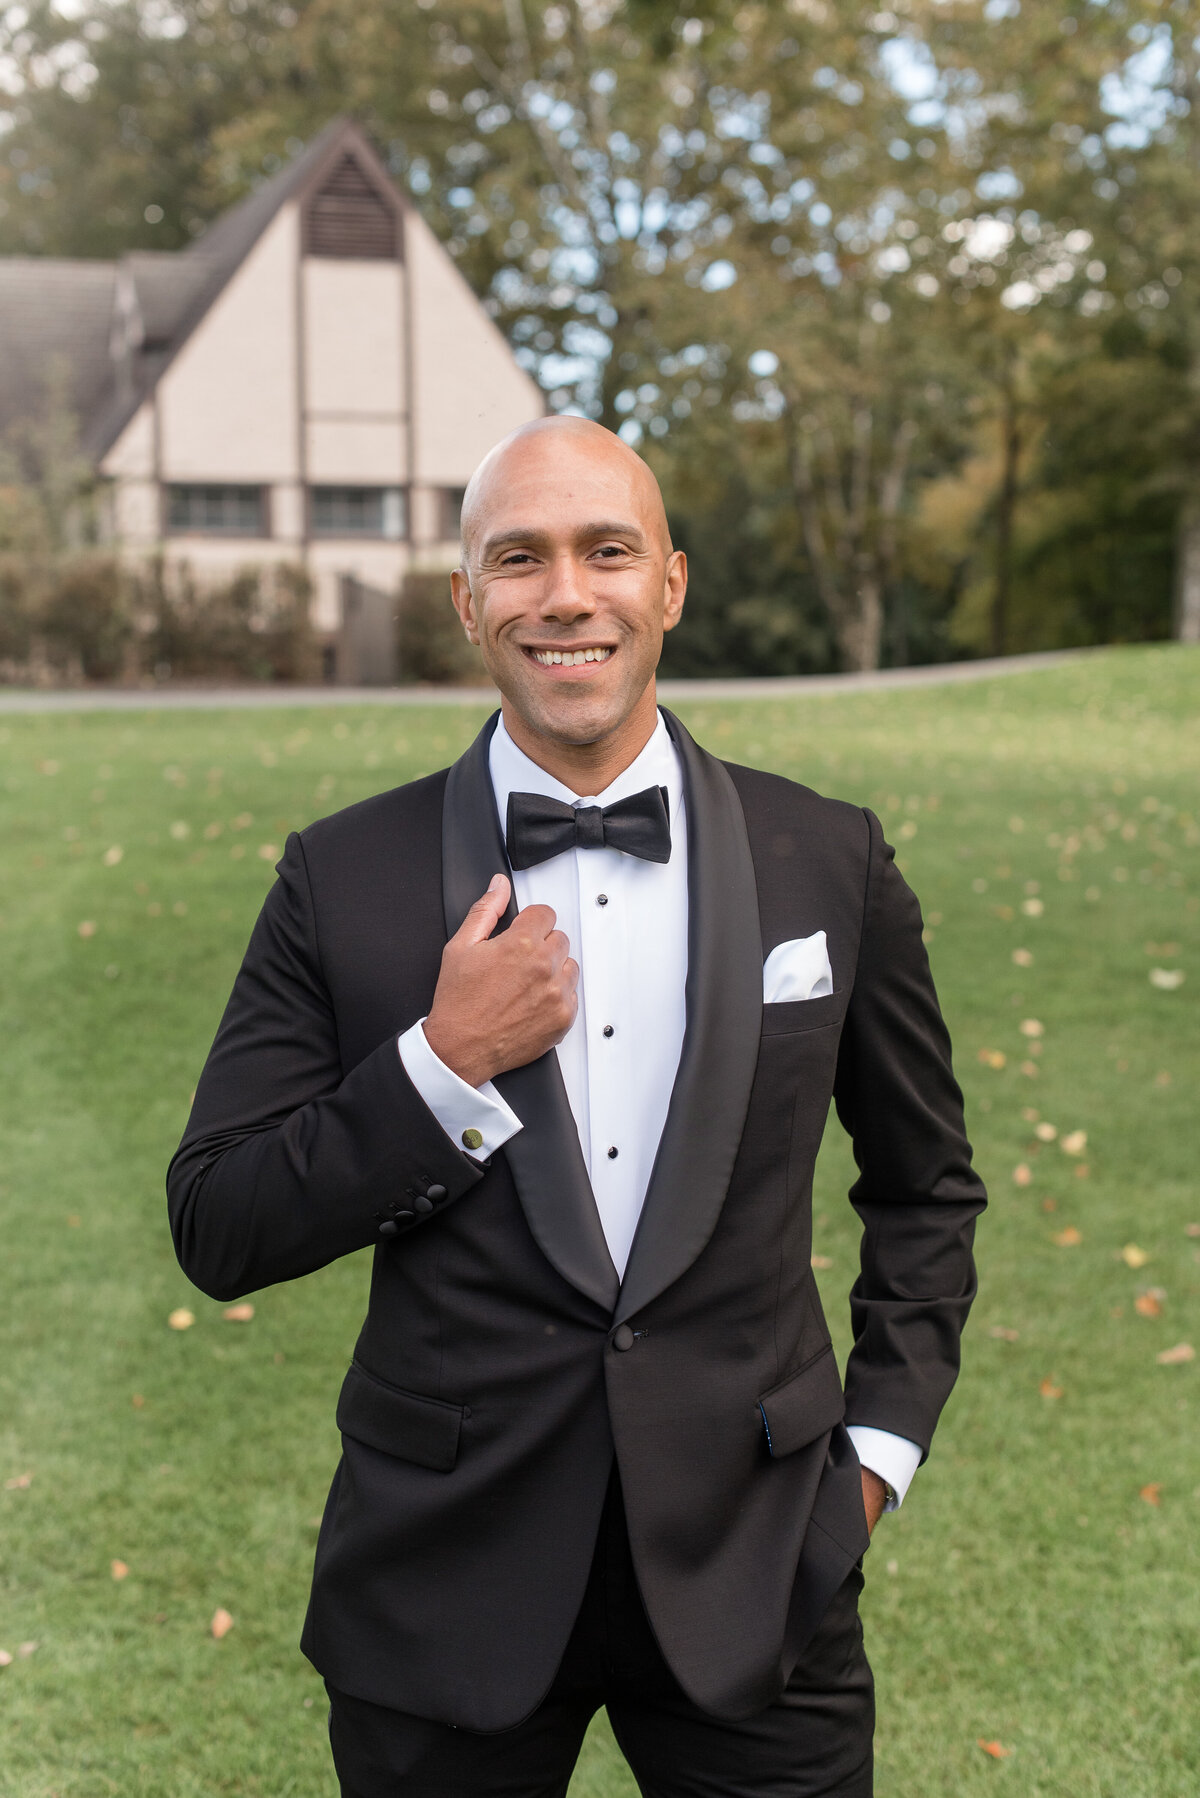 Groom smiling at camera holding edge of black tux jacket with right hand in North Jersey.